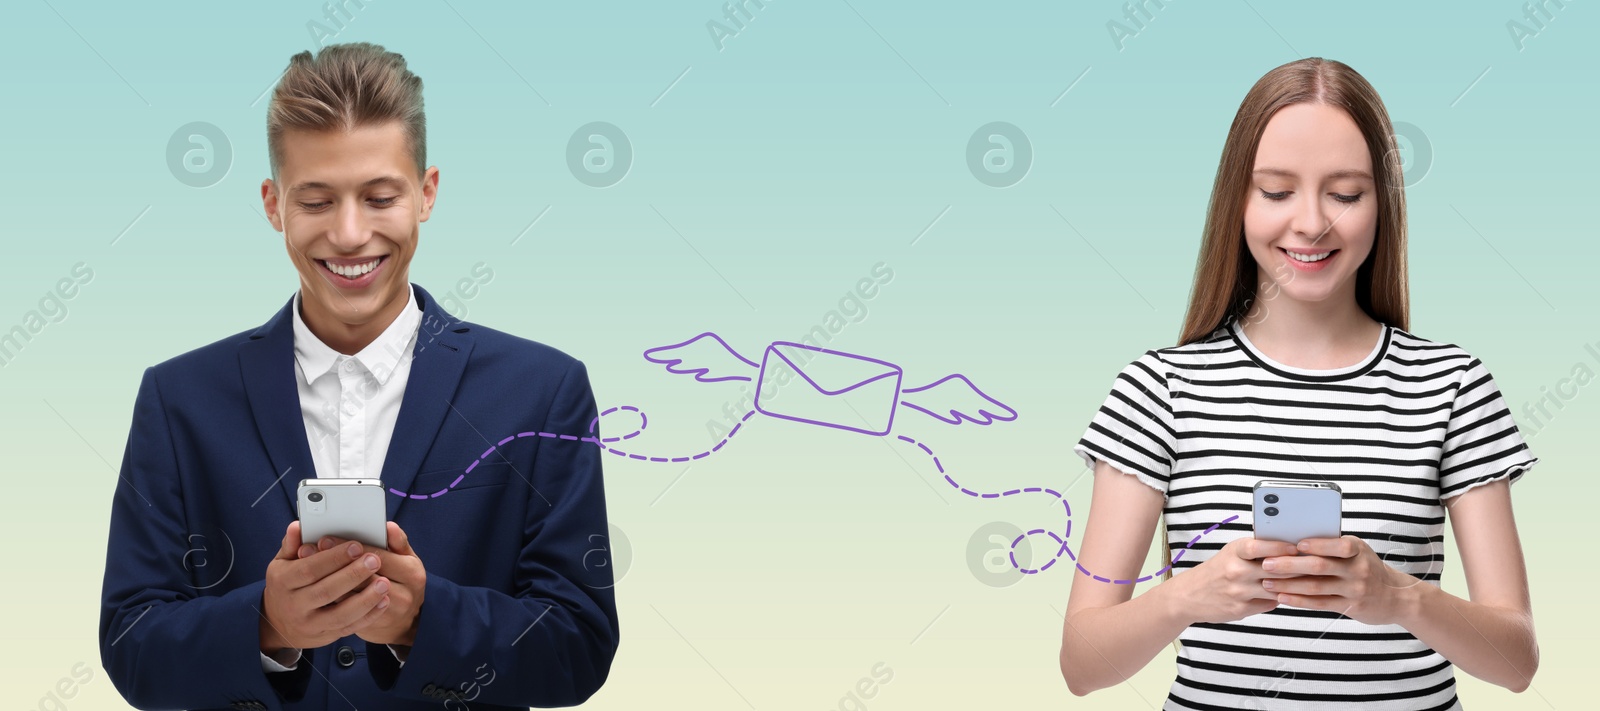 Image of Man and woman with smartphones messaging on color gradient background, banner design. Drawing of envelope between them